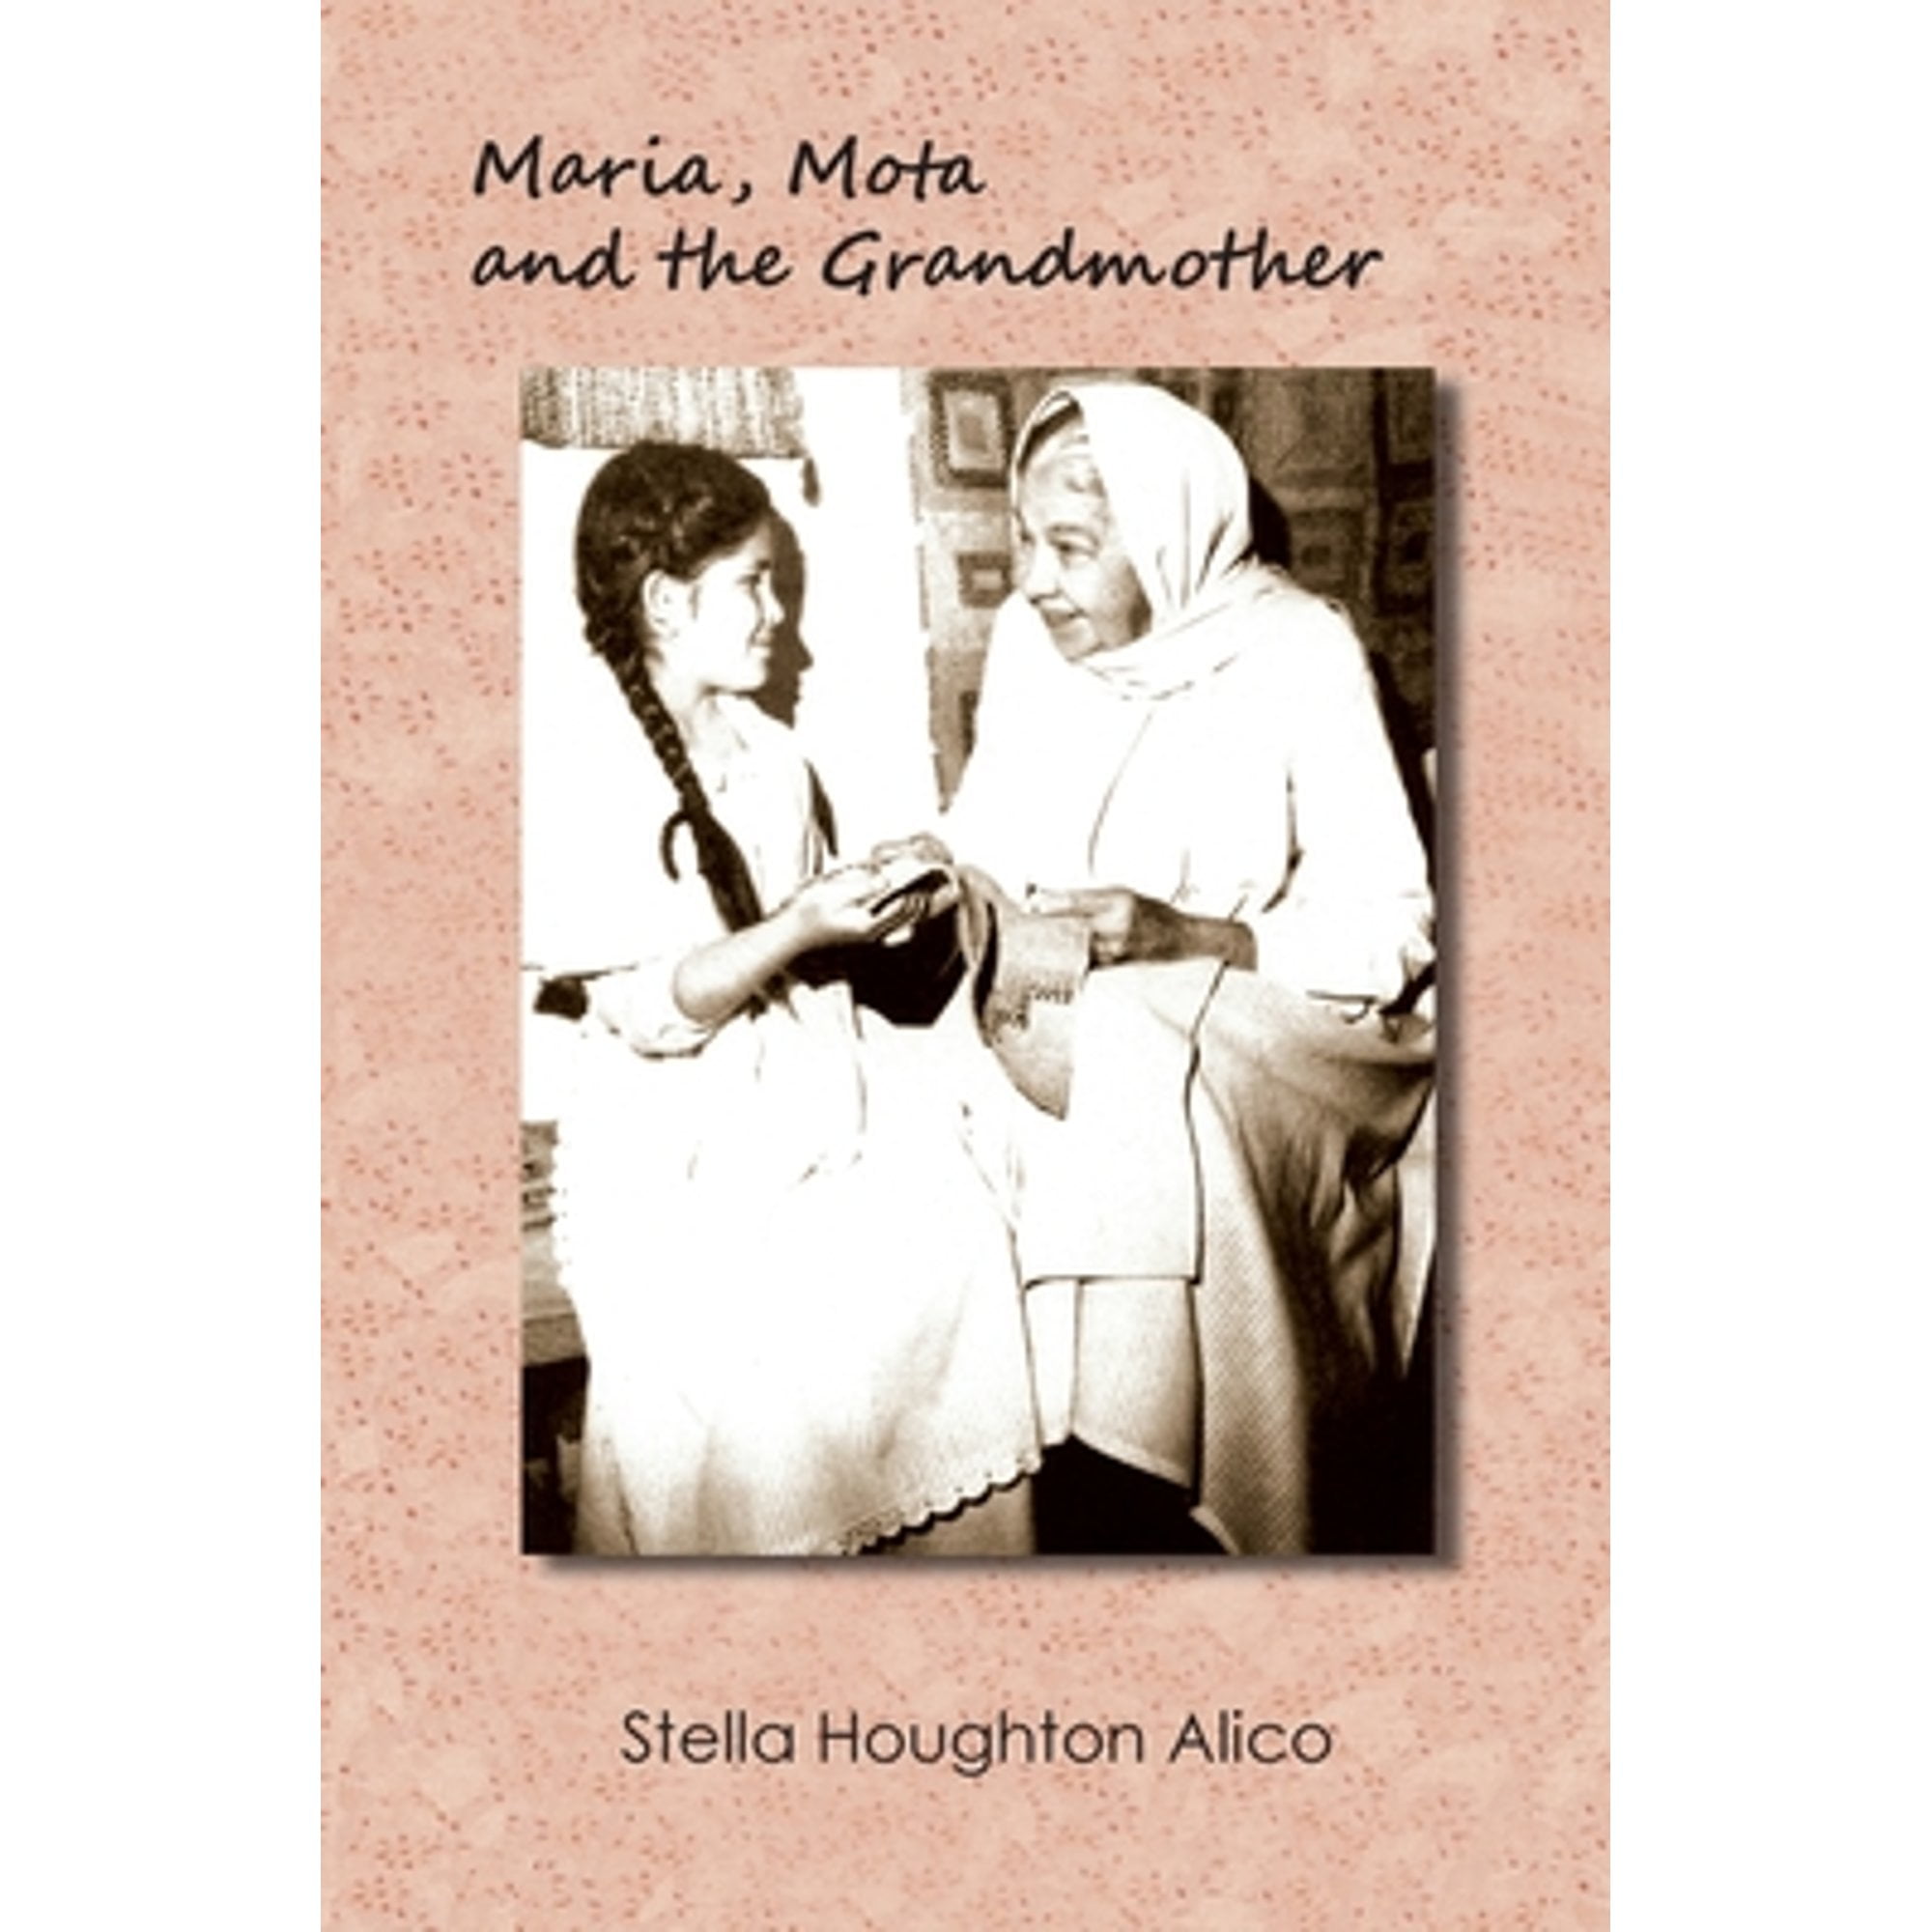 Pre-Owned Maria, Mota and the Grandmother: A Family Story (Paperback) by Stella Houghton Alico